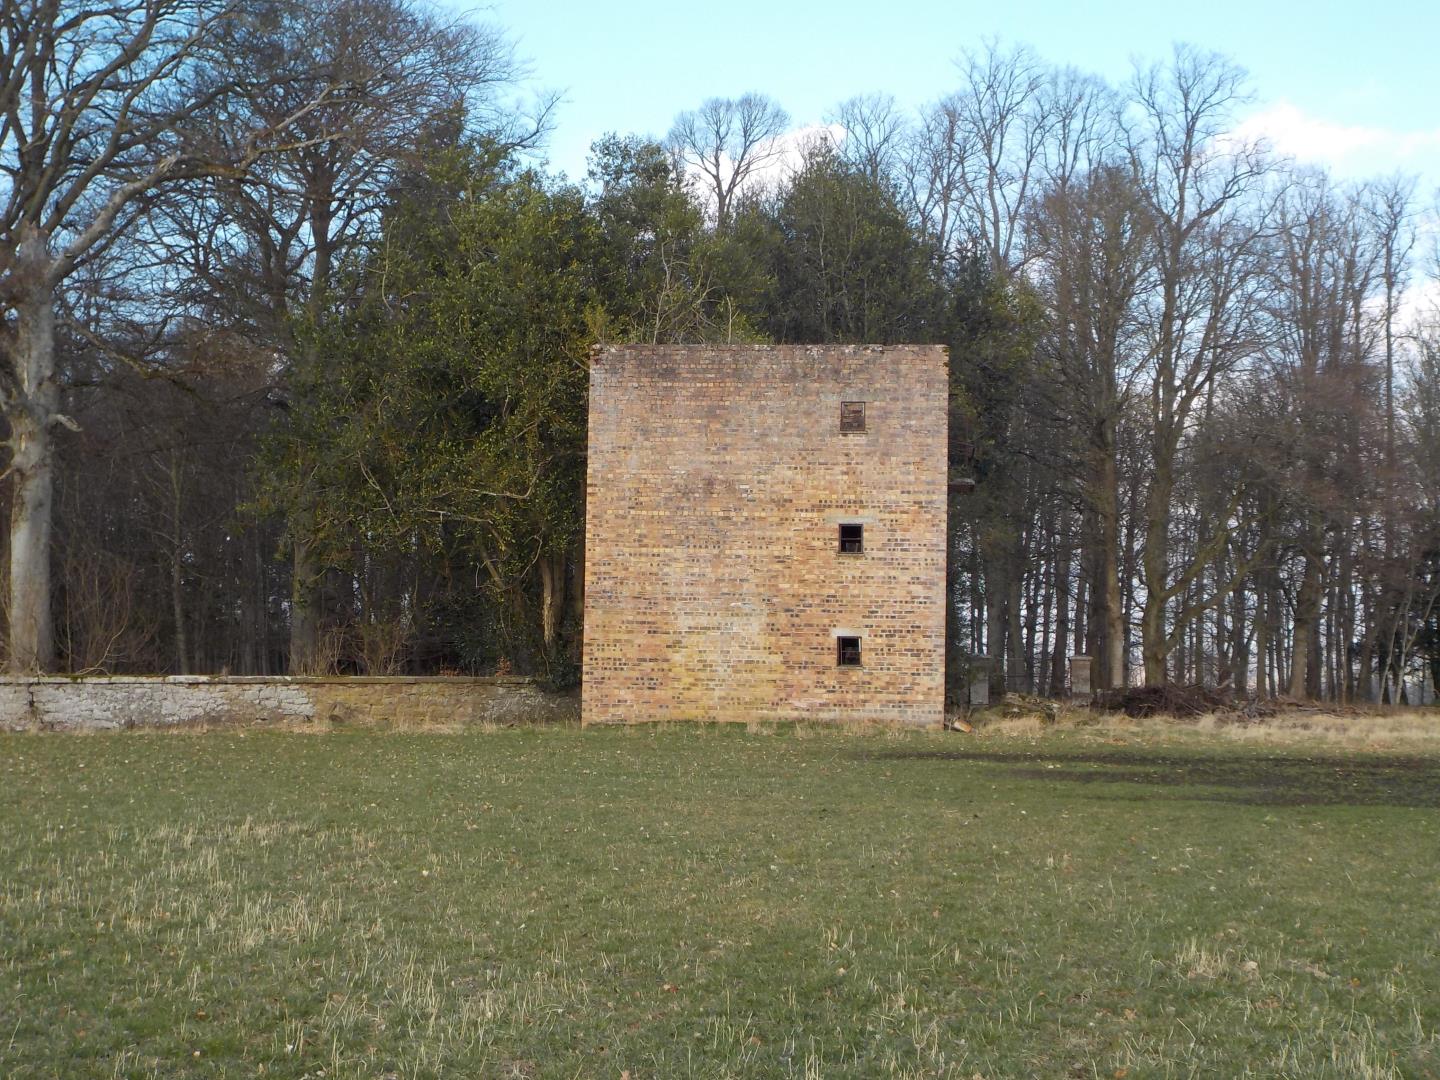 A water tower is all that now remains of the Balhary prisoner of war camp.